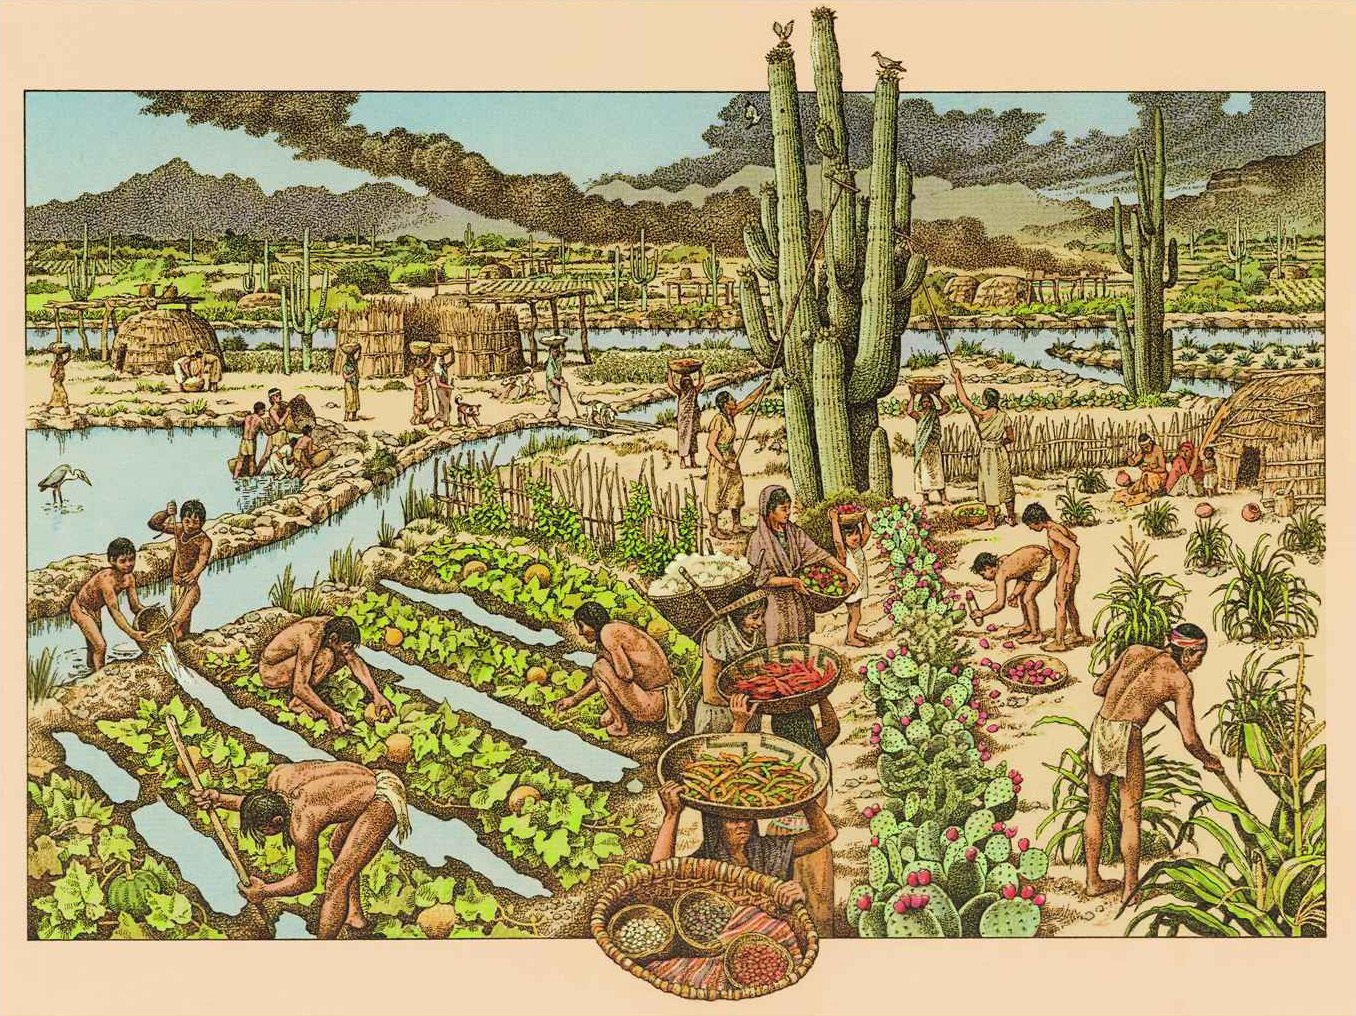 Illustration of ancient Hohokam Native Americans in a large farm site with canals.